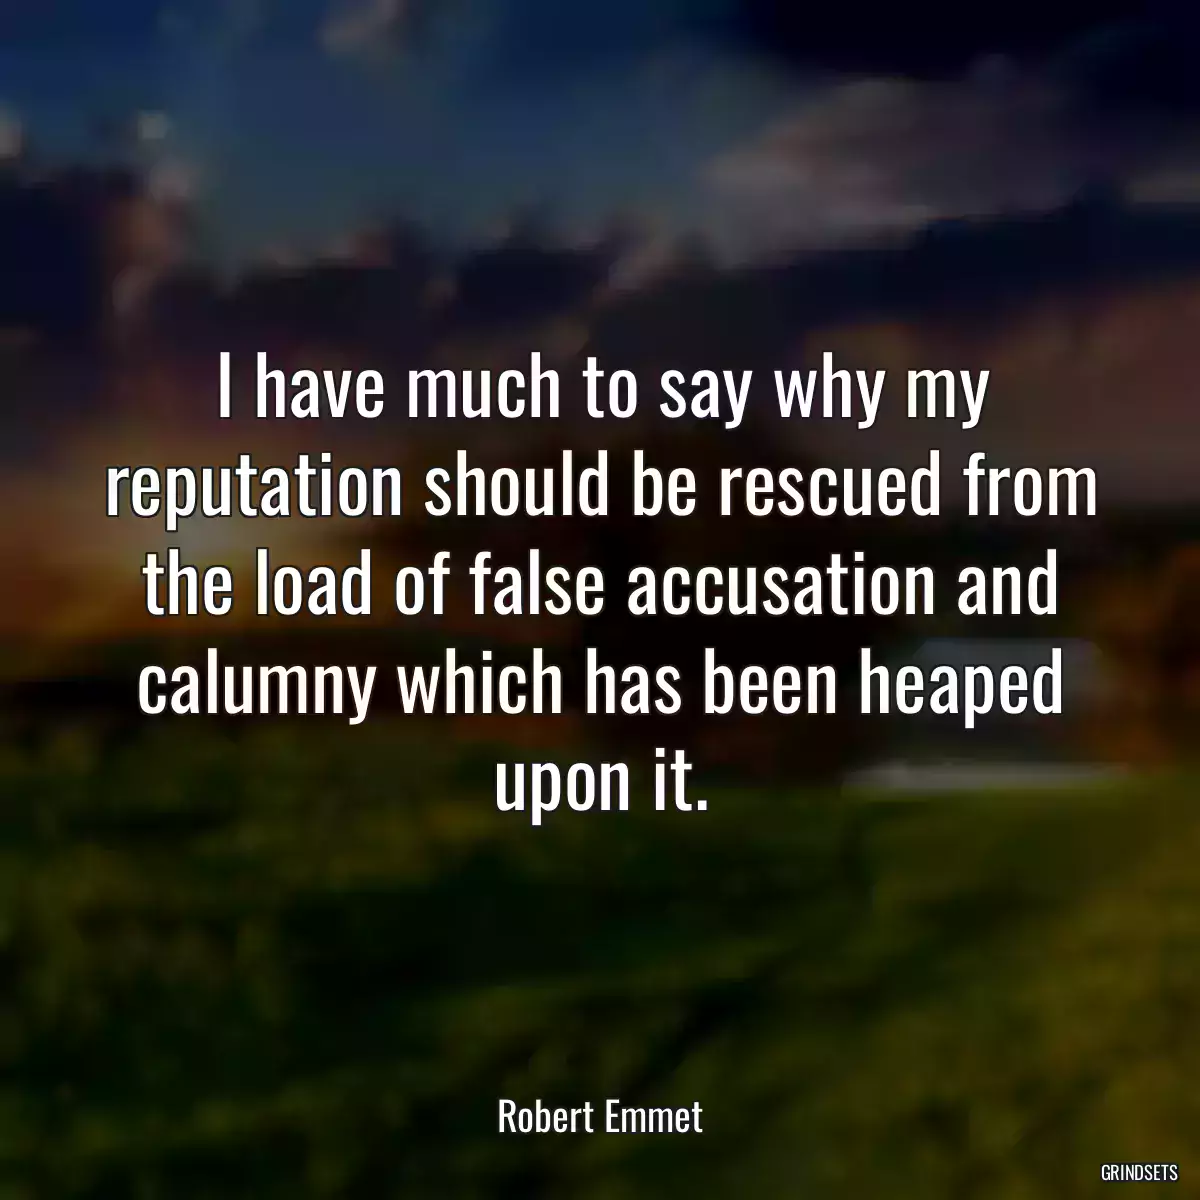 I have much to say why my reputation should be rescued from the load of false accusation and calumny which has been heaped upon it.